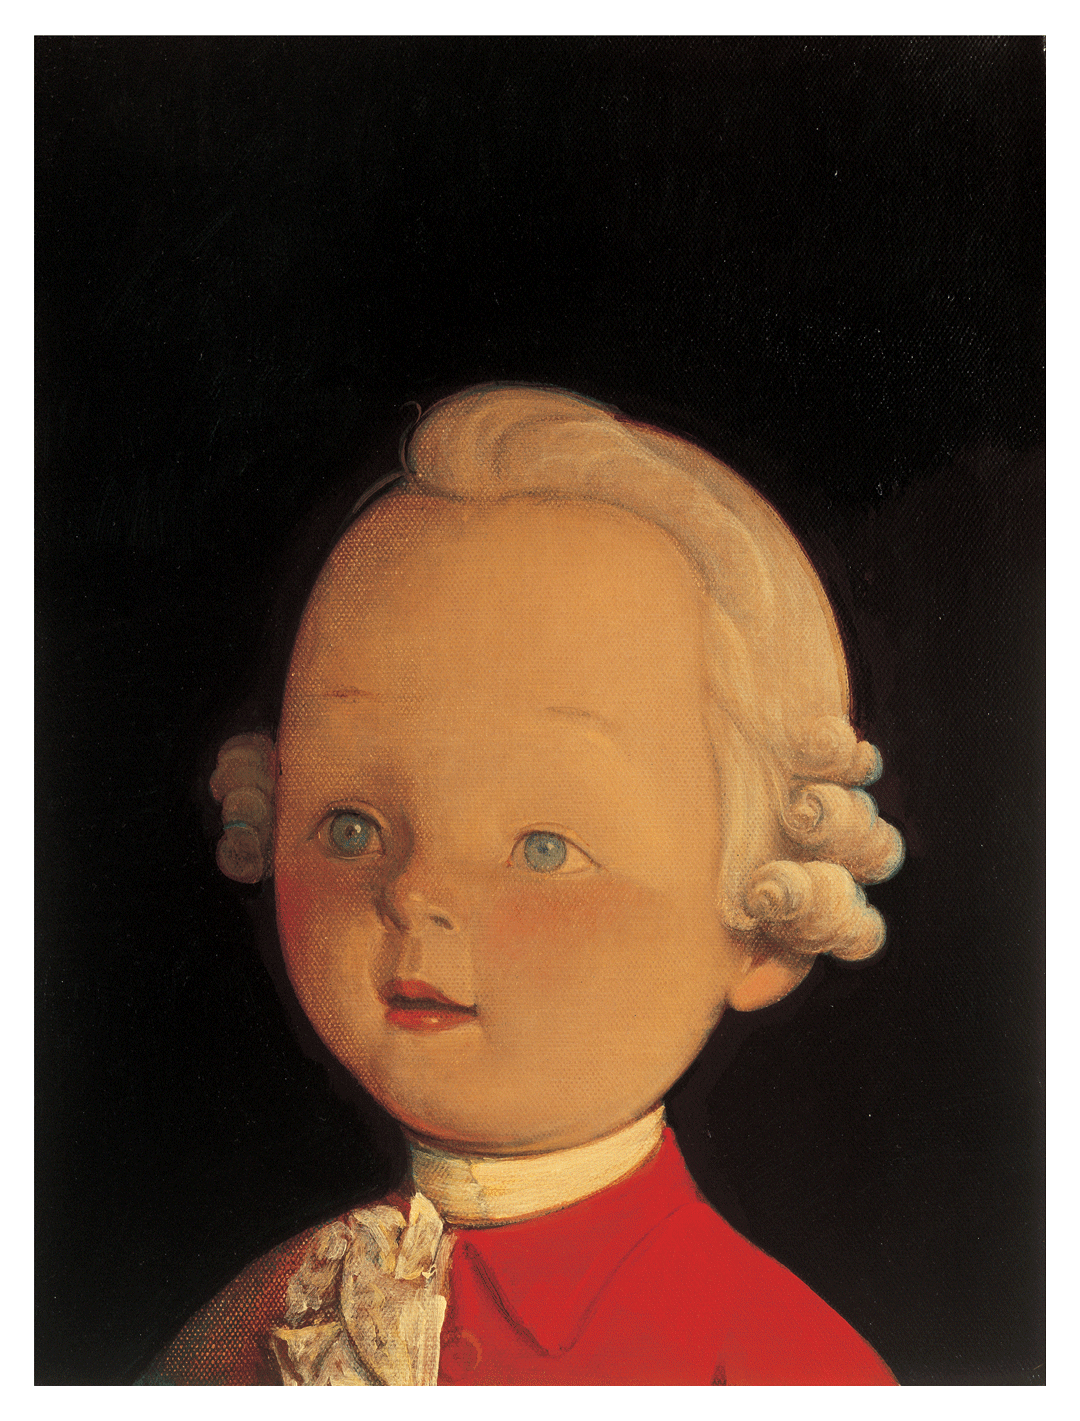 A painting by Liu Ye, titled Mozart, dated 2009.